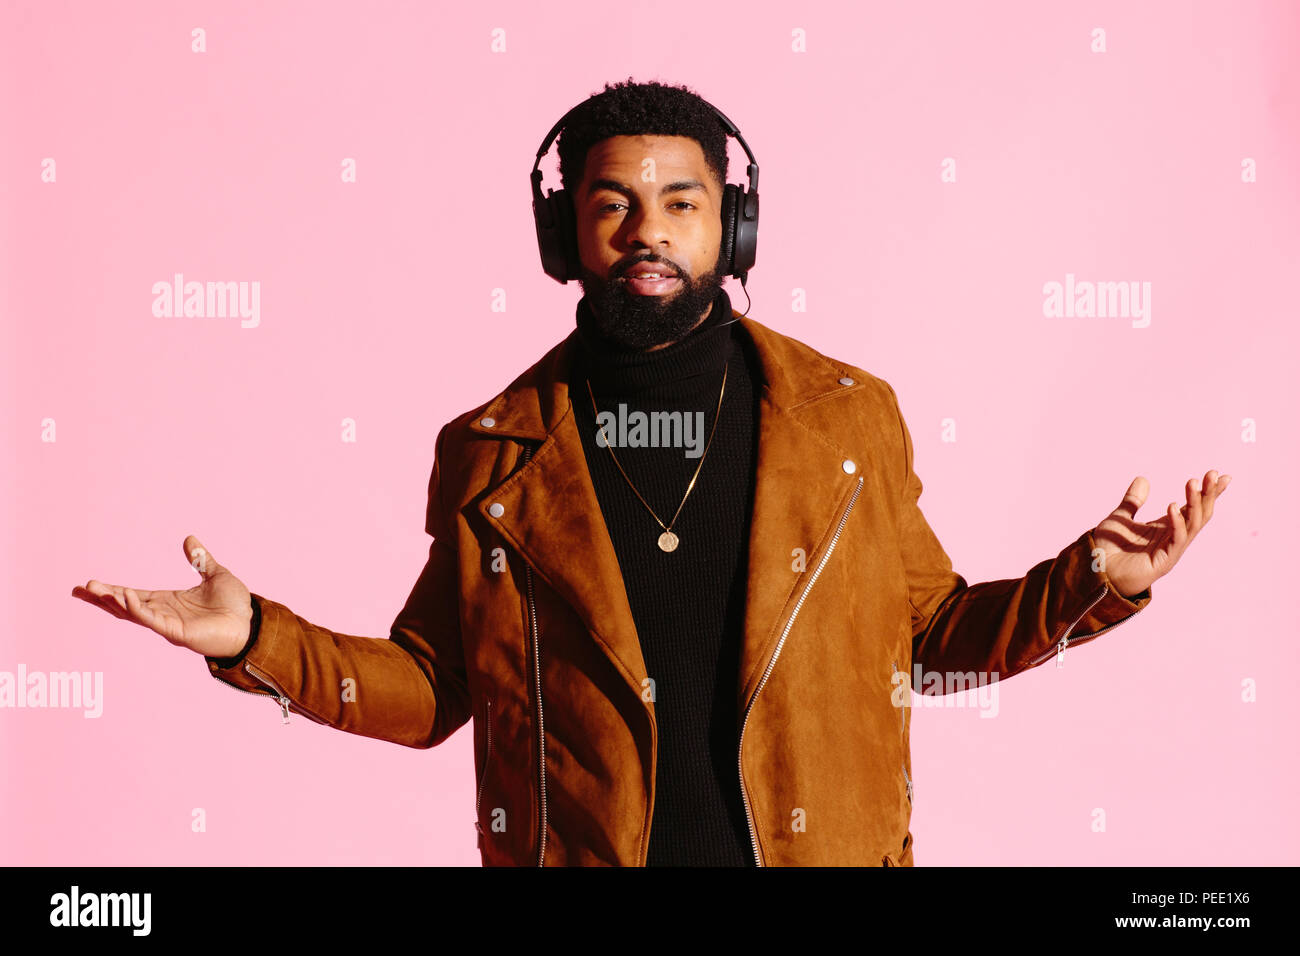 Cool African American man with beard, and headphones. isolated on pink studio background. Hands to the sides. Stock Photo